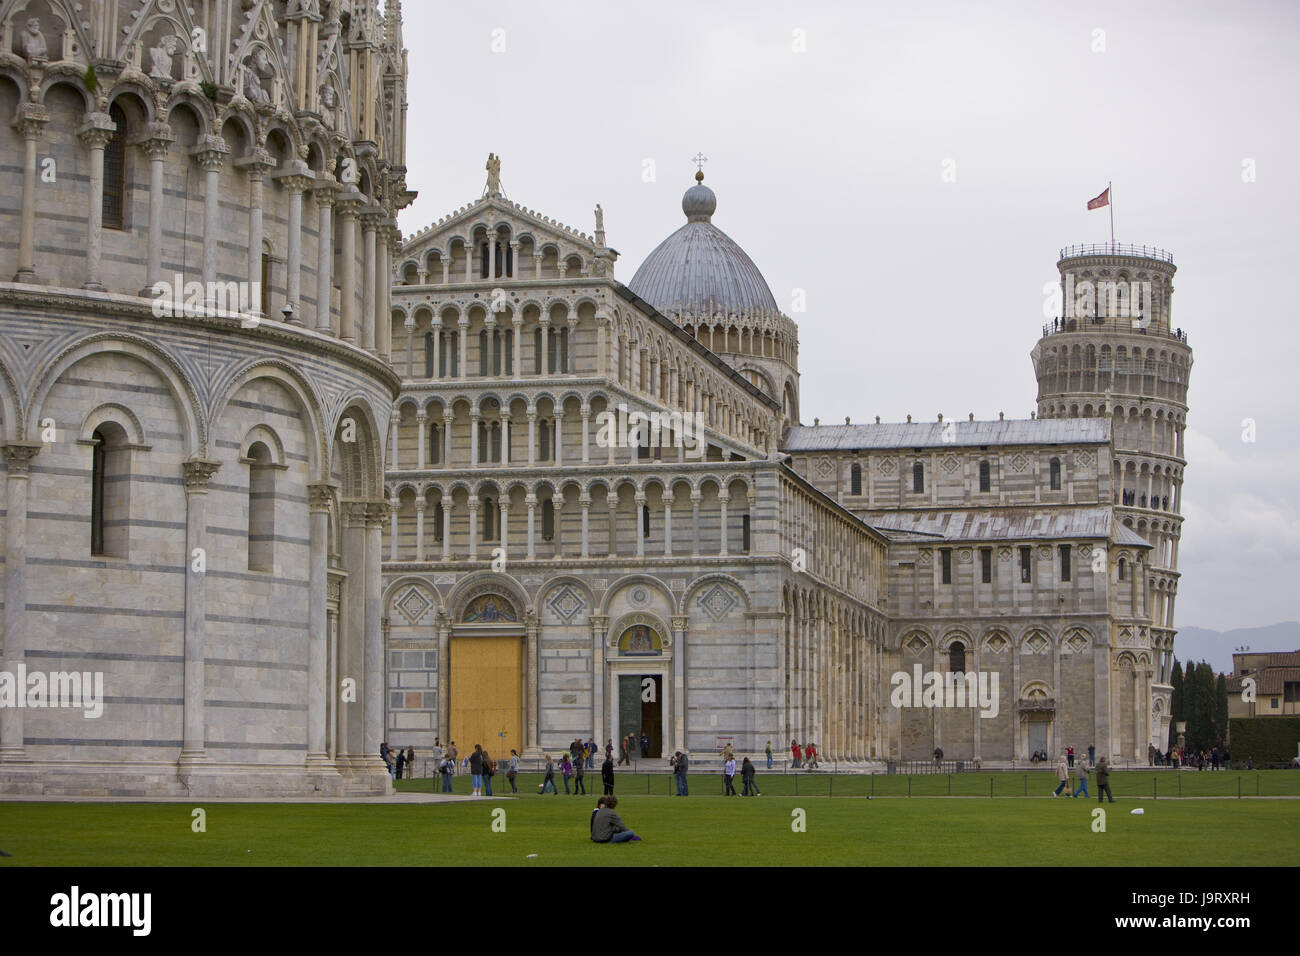 Italy,Tuscany,Pisa,Piazza del Duomo,baptistry,cathedral,oblique tower,Europe,structures,historically,architecture,bell tower,Campanile,culture,Duomo Santa Maria Assunta,church,sacred construction,church,Campo dei Miracoli,Battistero,Torre Pendente,baptismal church,person,passer-by,visitor,place of interest,landmark,curled,UNESCO-world cultural heritage,outside, Stock Photo